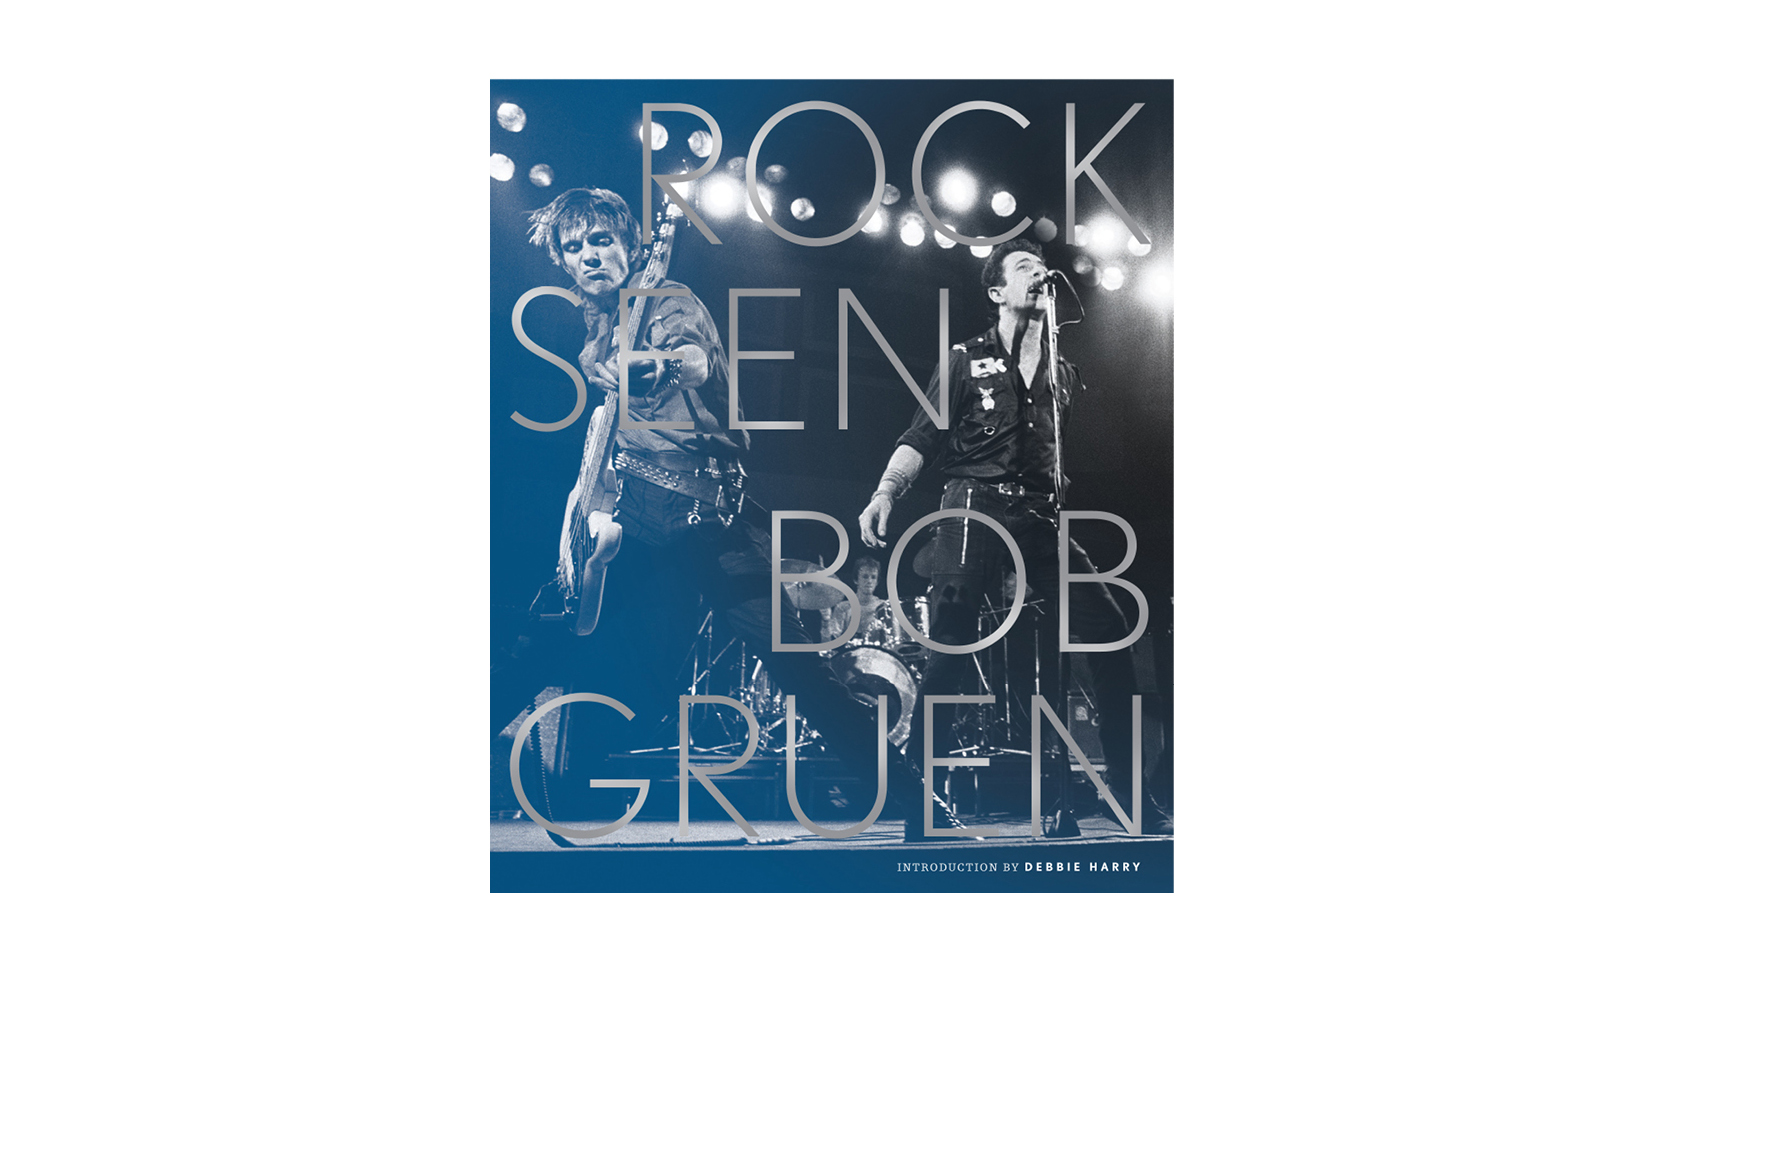   Rock Seen -  10 X 12 in., 288 pg., hardcover with jacket, foil stamped title. Design; Galen Smith // Publisher; Abrams Books     